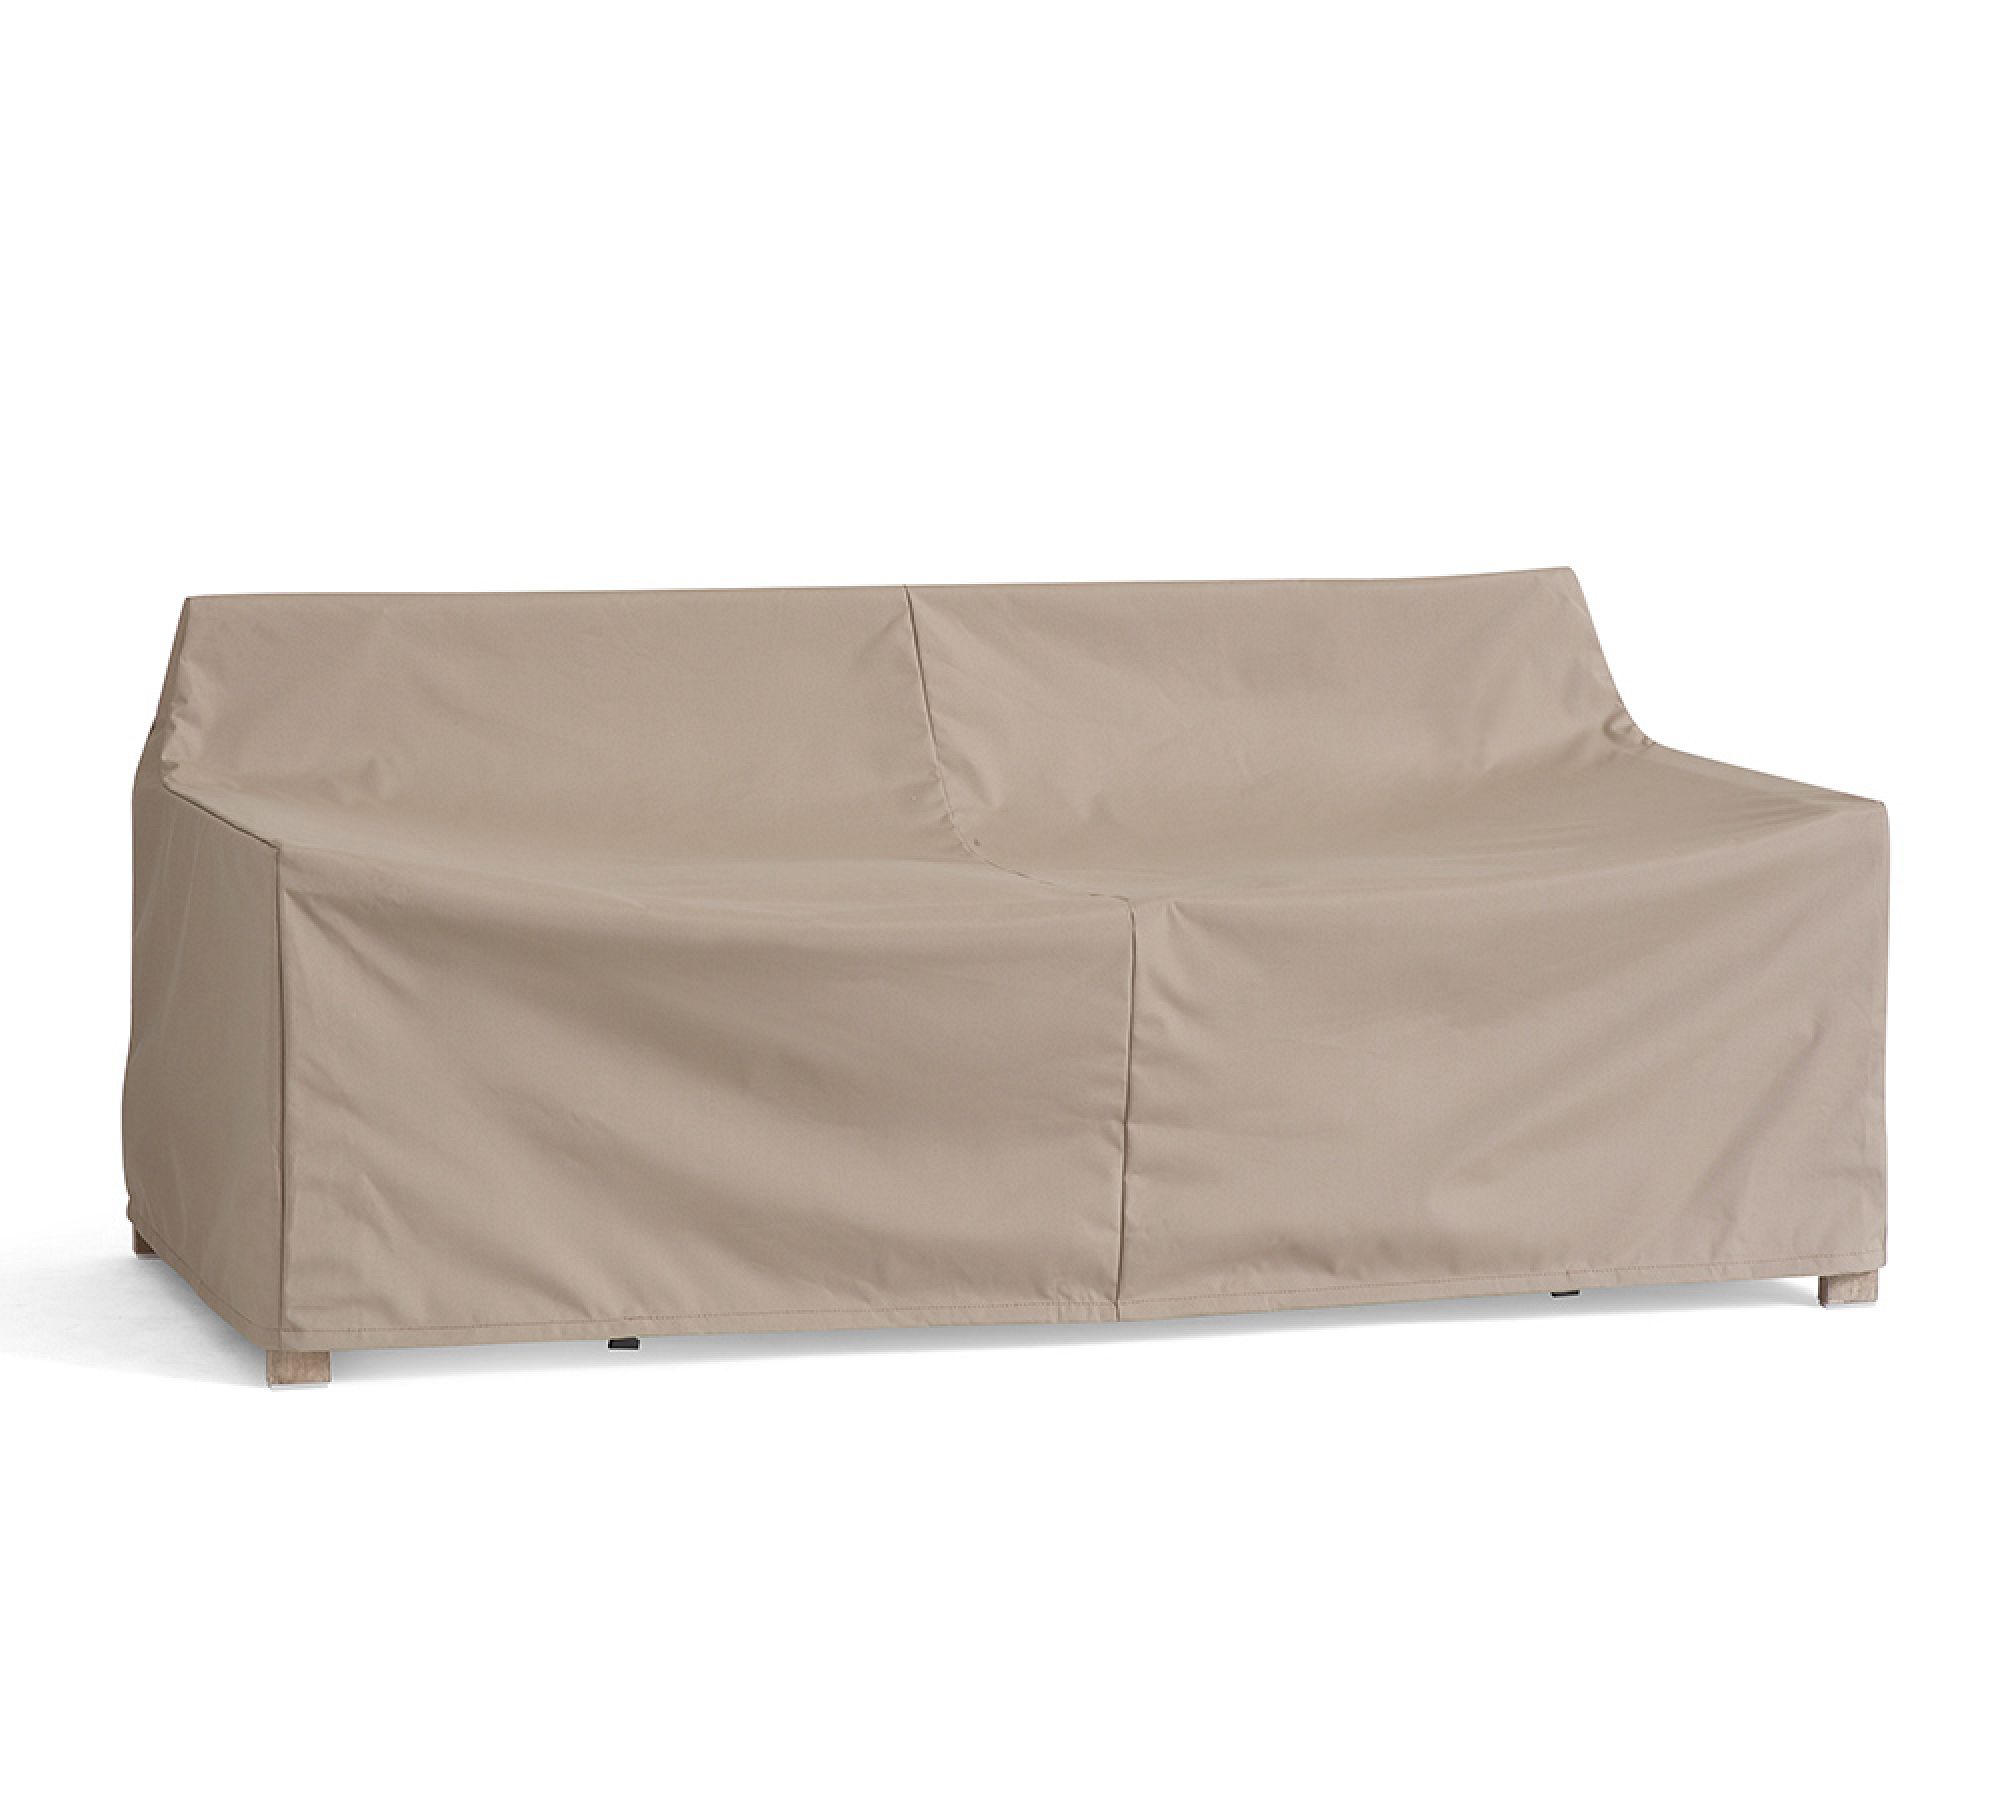 Fallbrook Custom Fit Outdoor Furniture Cover